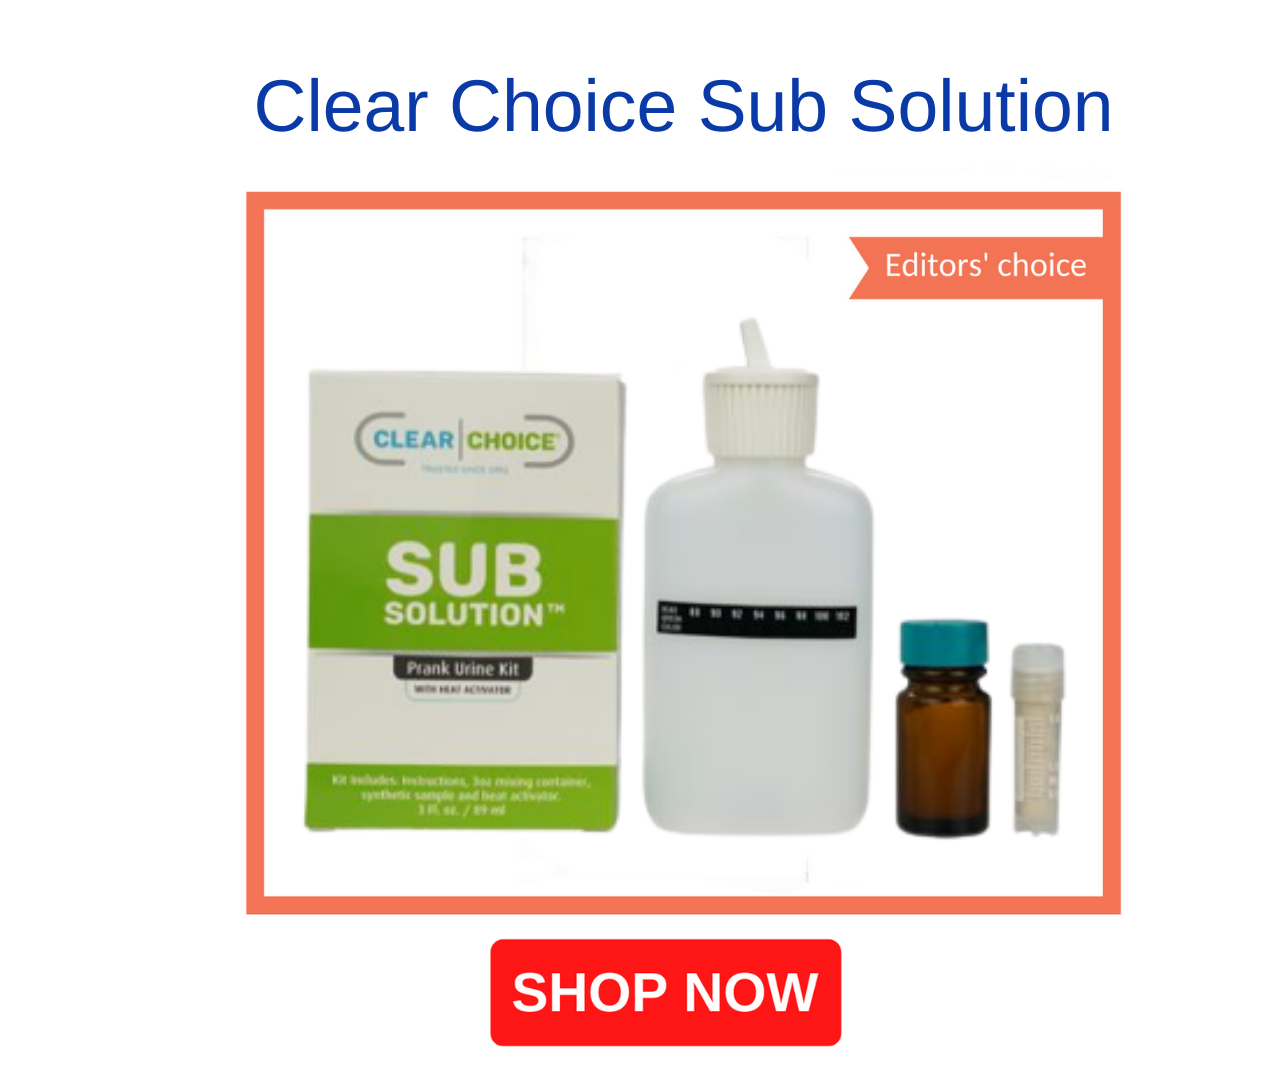 Does Clear Choice Sub Solution Really